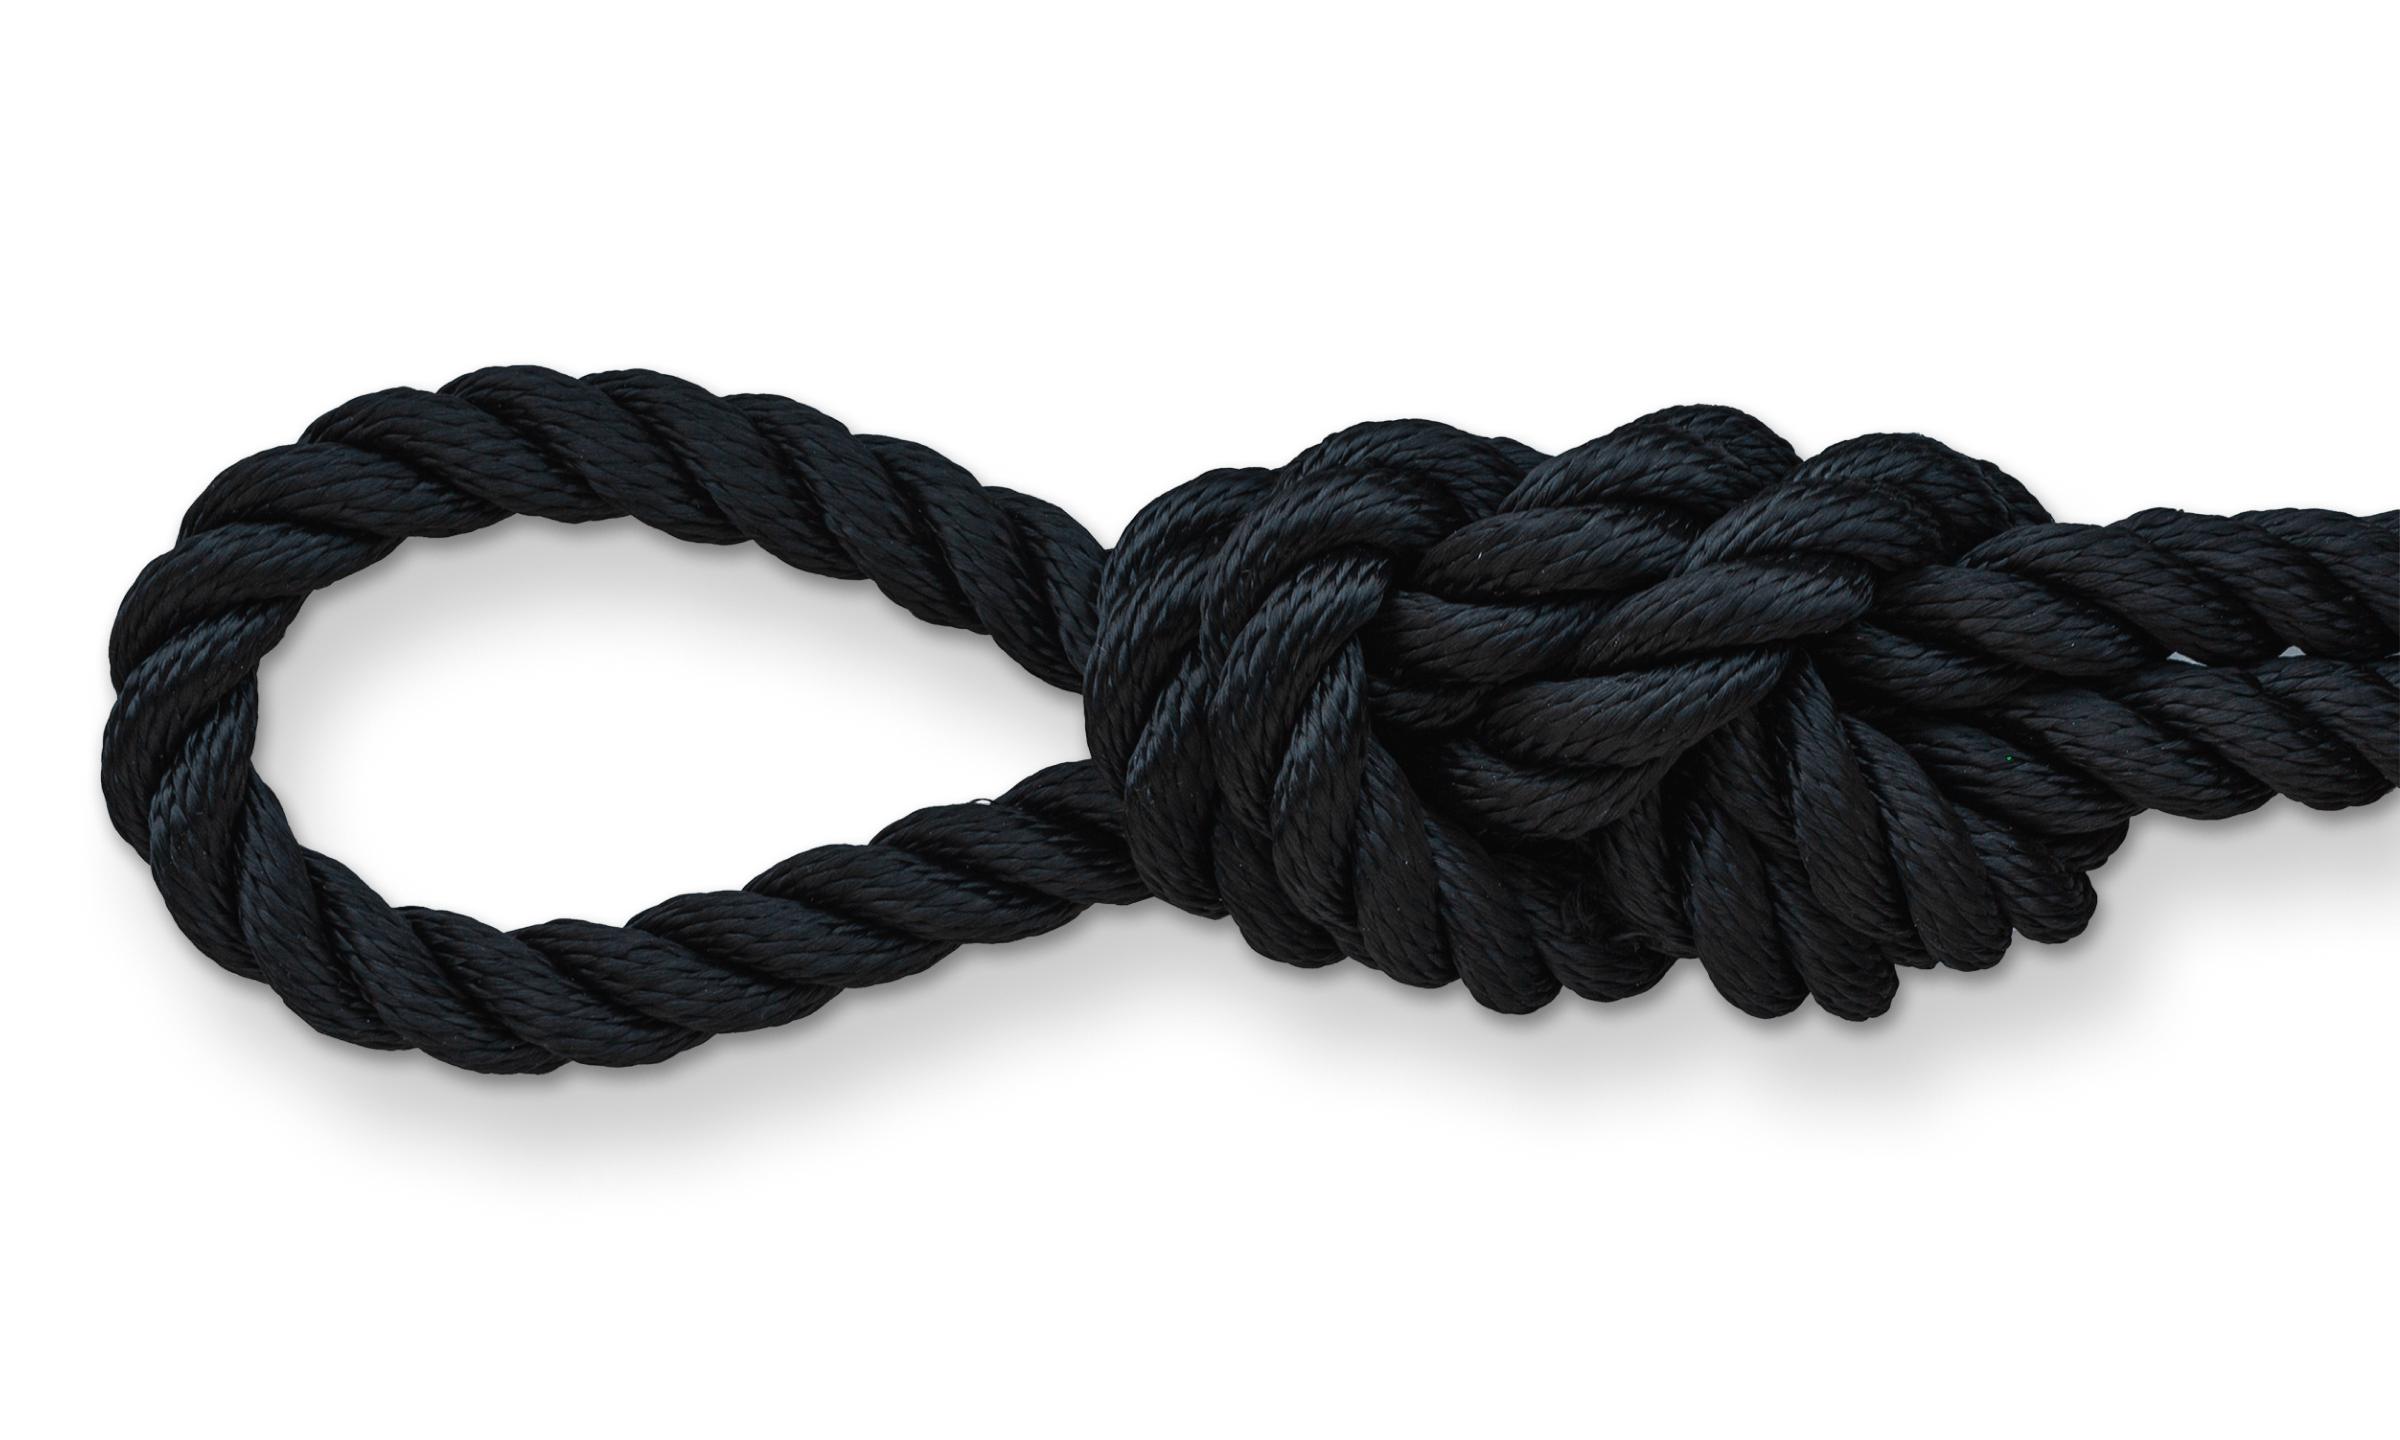 18′ Climbing Rope with Whipped End: Poly Dacron